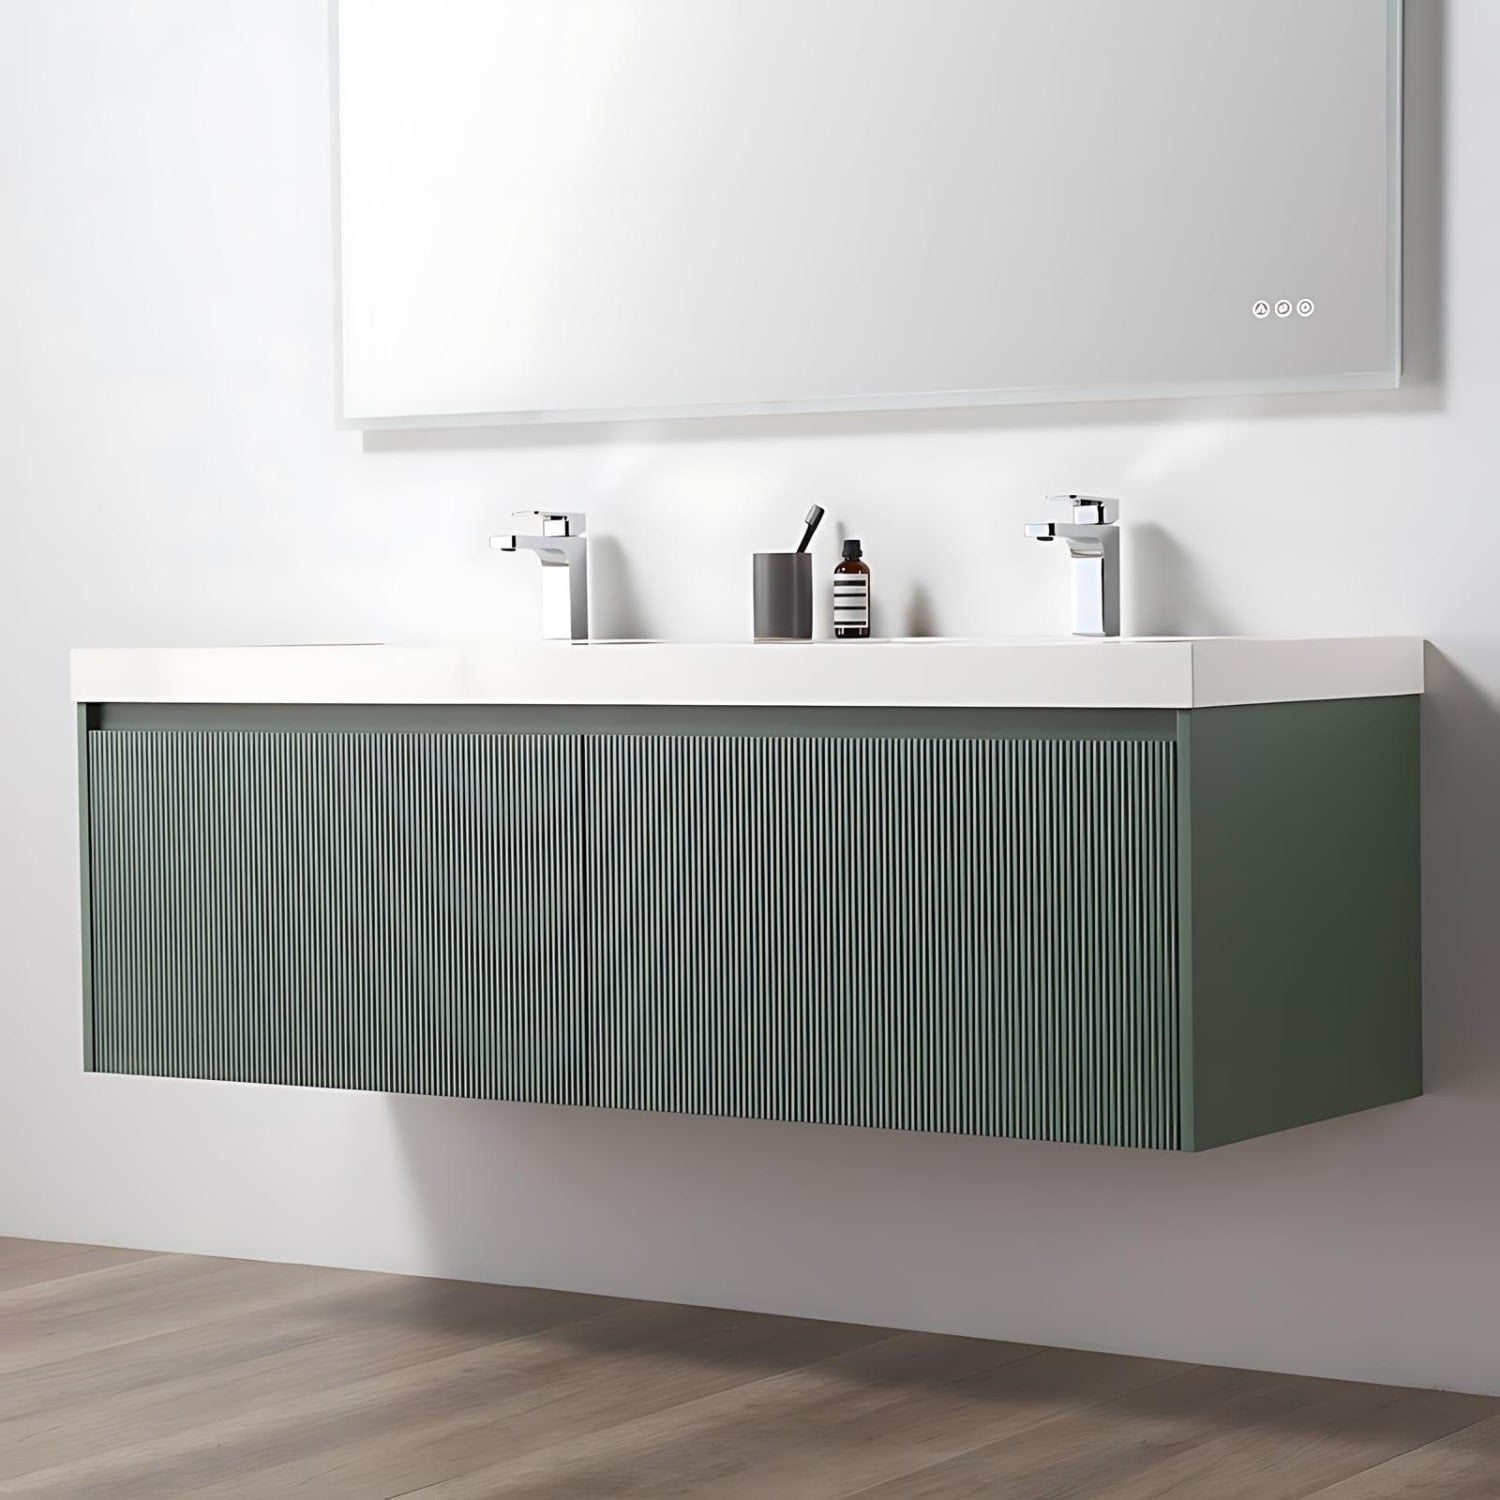 Plywood Bathroom Vanities are a great bathroom vanity option for style and easy installation.